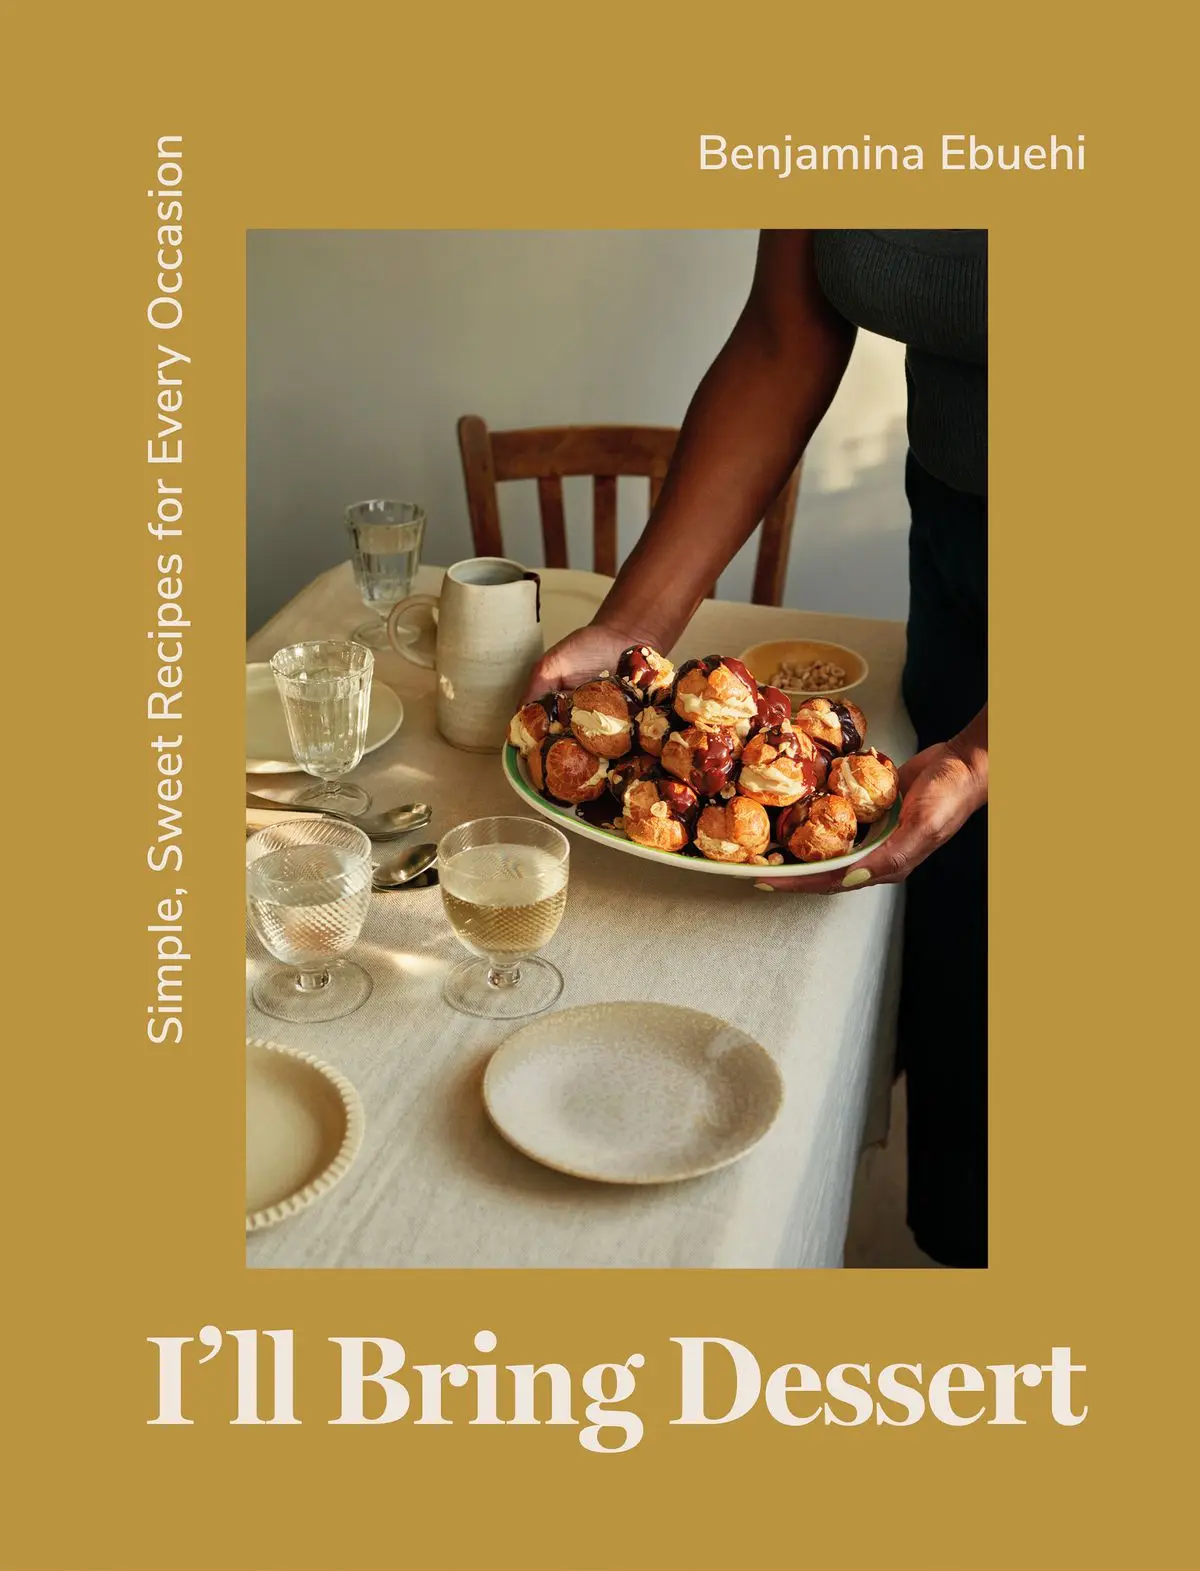 The cover of I’ll Bring Dessert